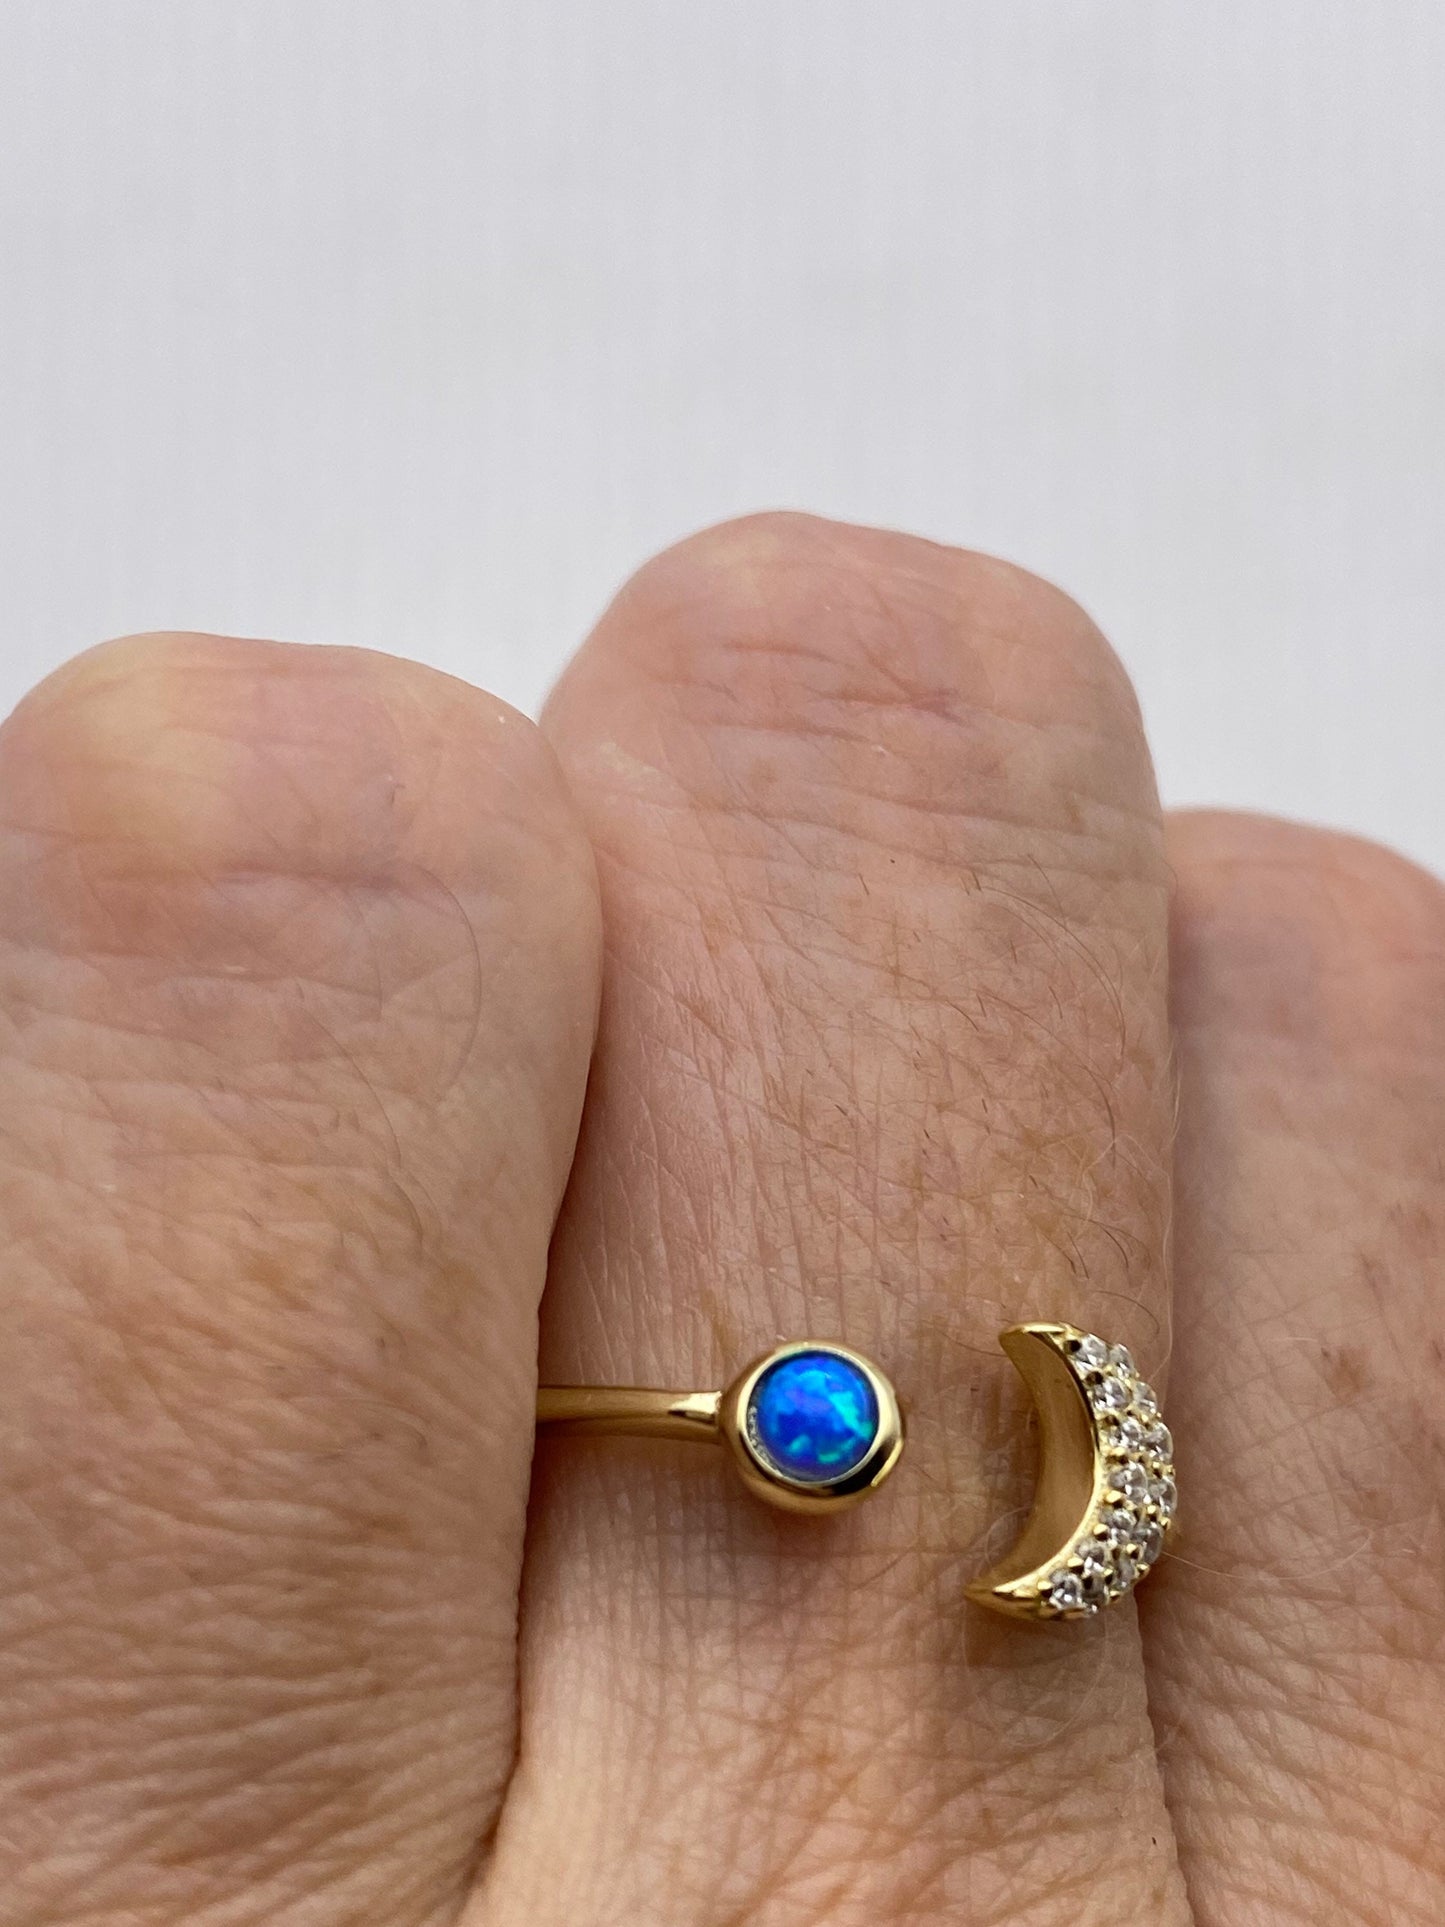 Vintage Ethiopian Fire Opal Moon and Star Adjustable Band Golden 925 Sterling Silver Ring